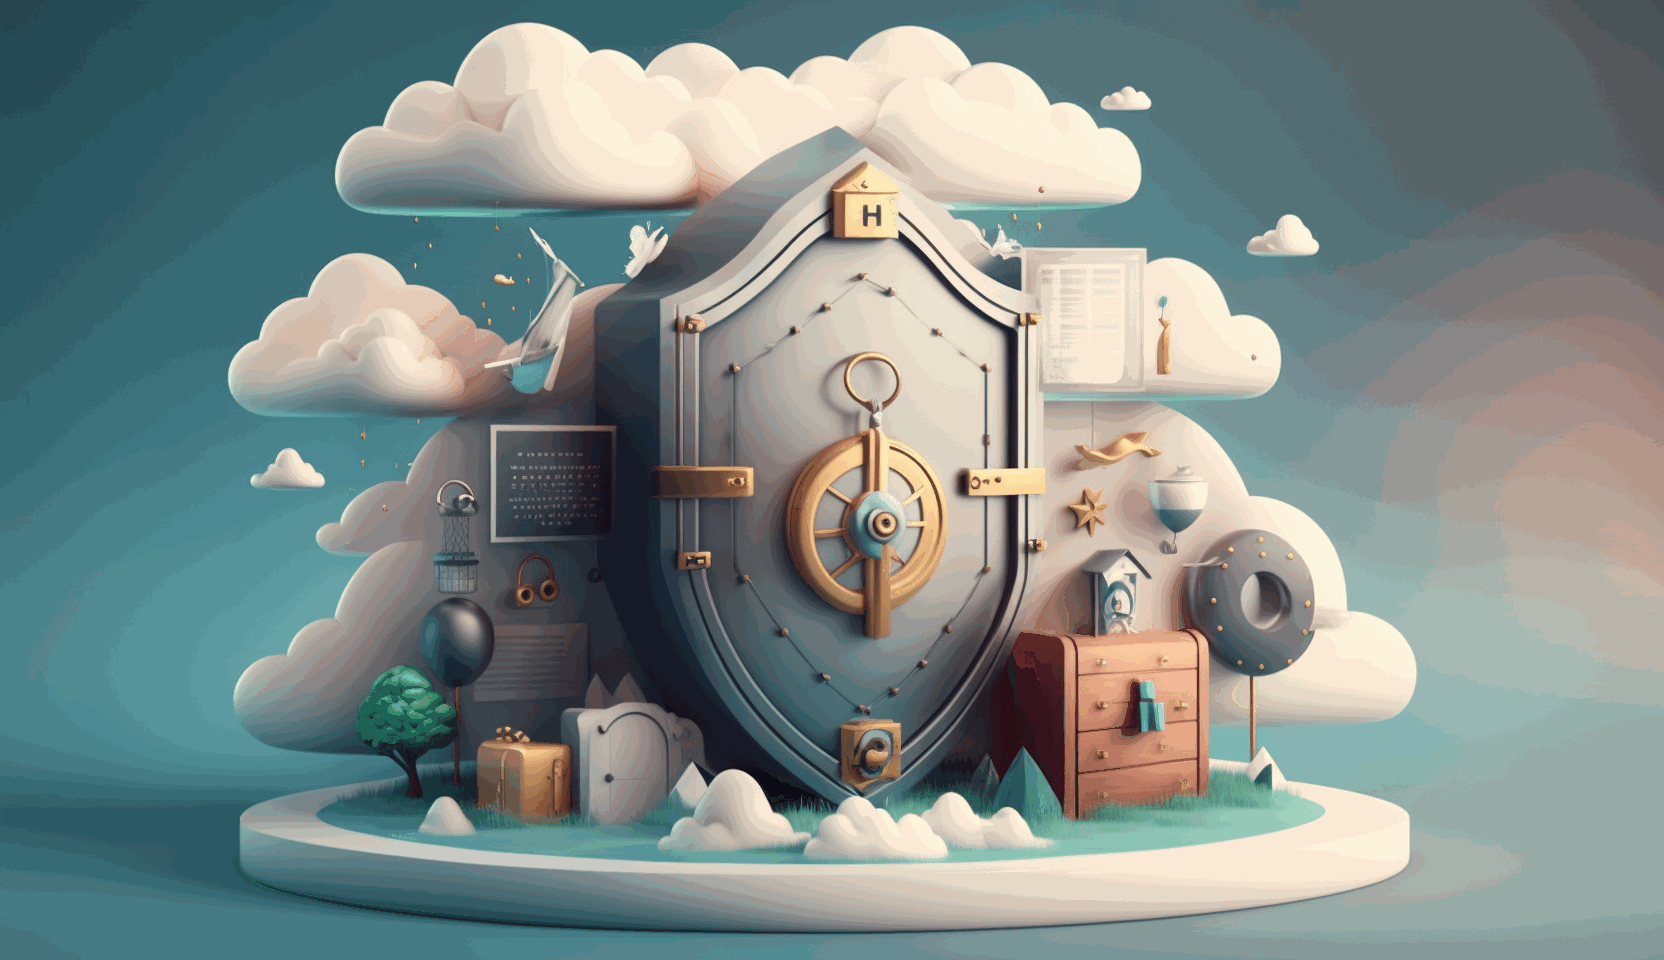 A 3D animated image of a secure vault in the clouds, with various regulatory icons (GDPR, HIPAA, FISMA) floating around it and a shield symbolizing data protection.